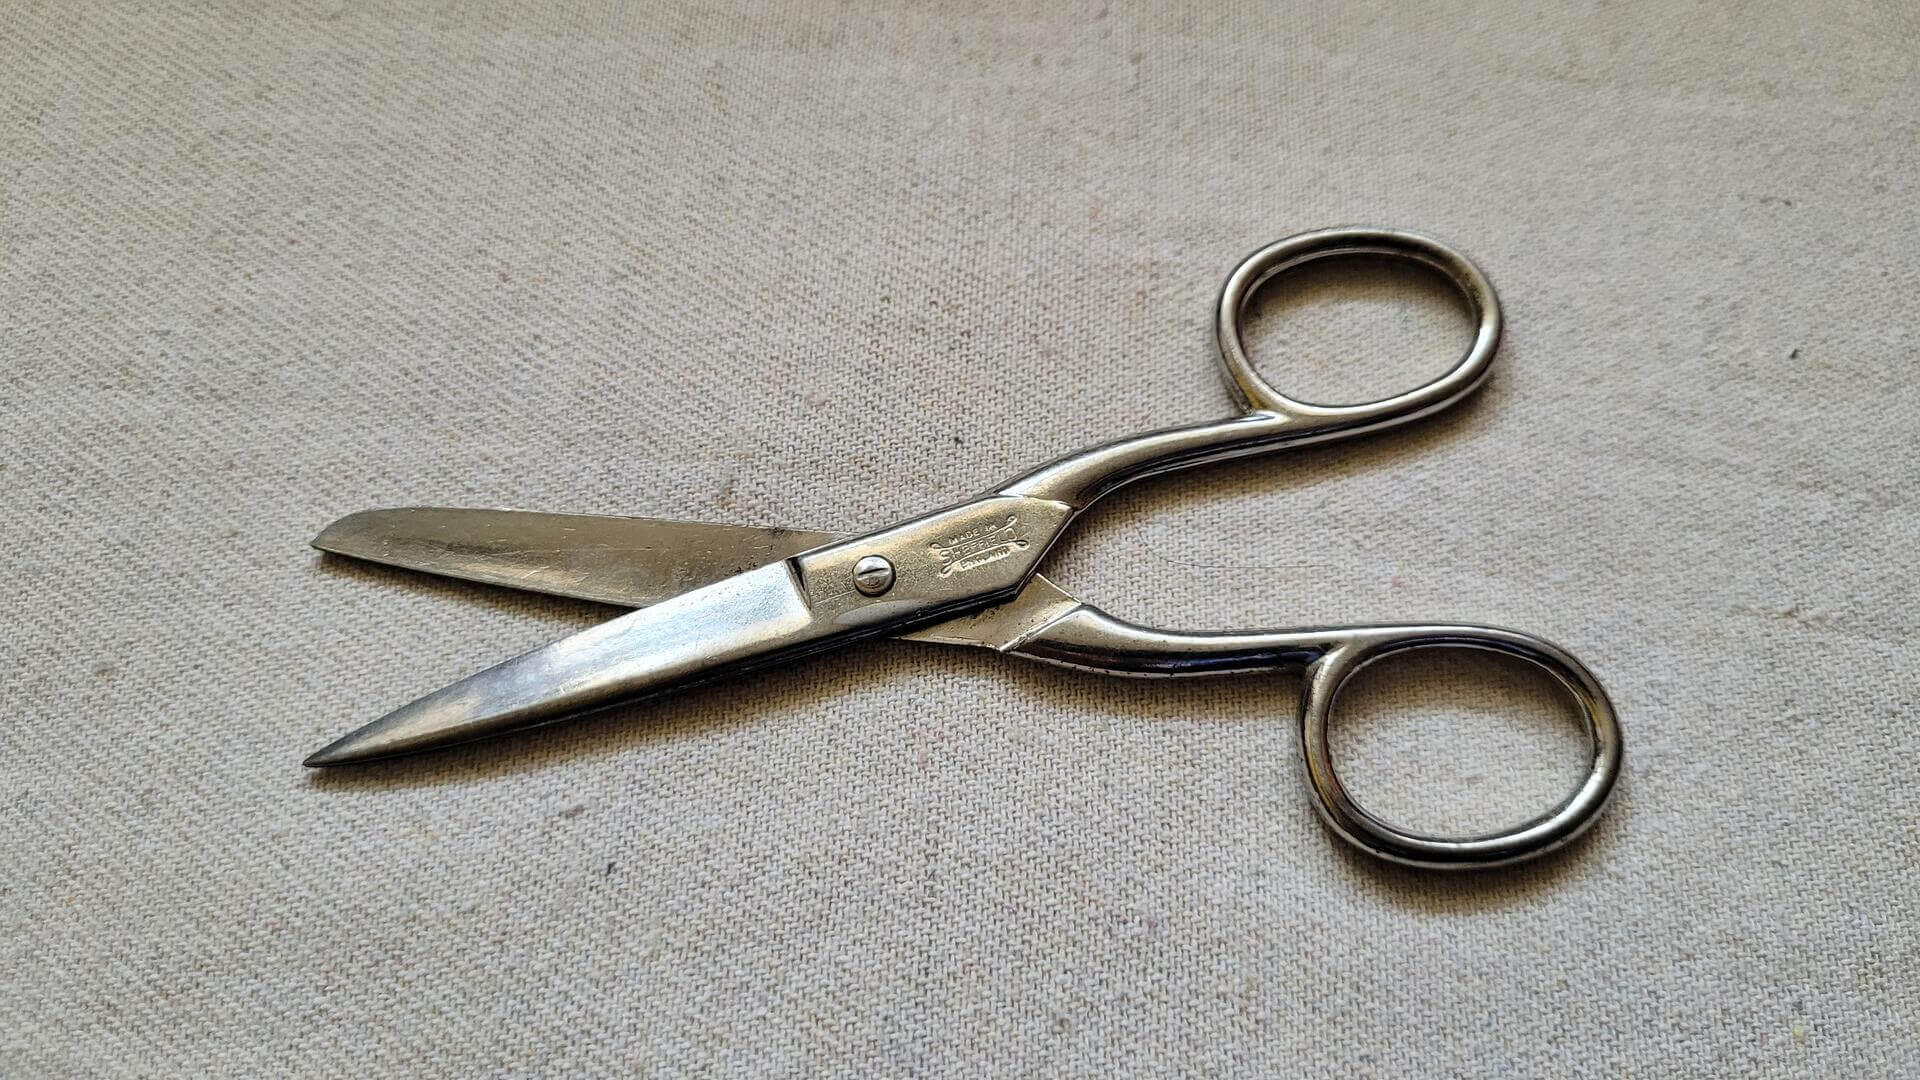 Vintage All Purpose Scissors 5 Inches Made in Sheffield England - antique collectible sewing and cutting hand tools